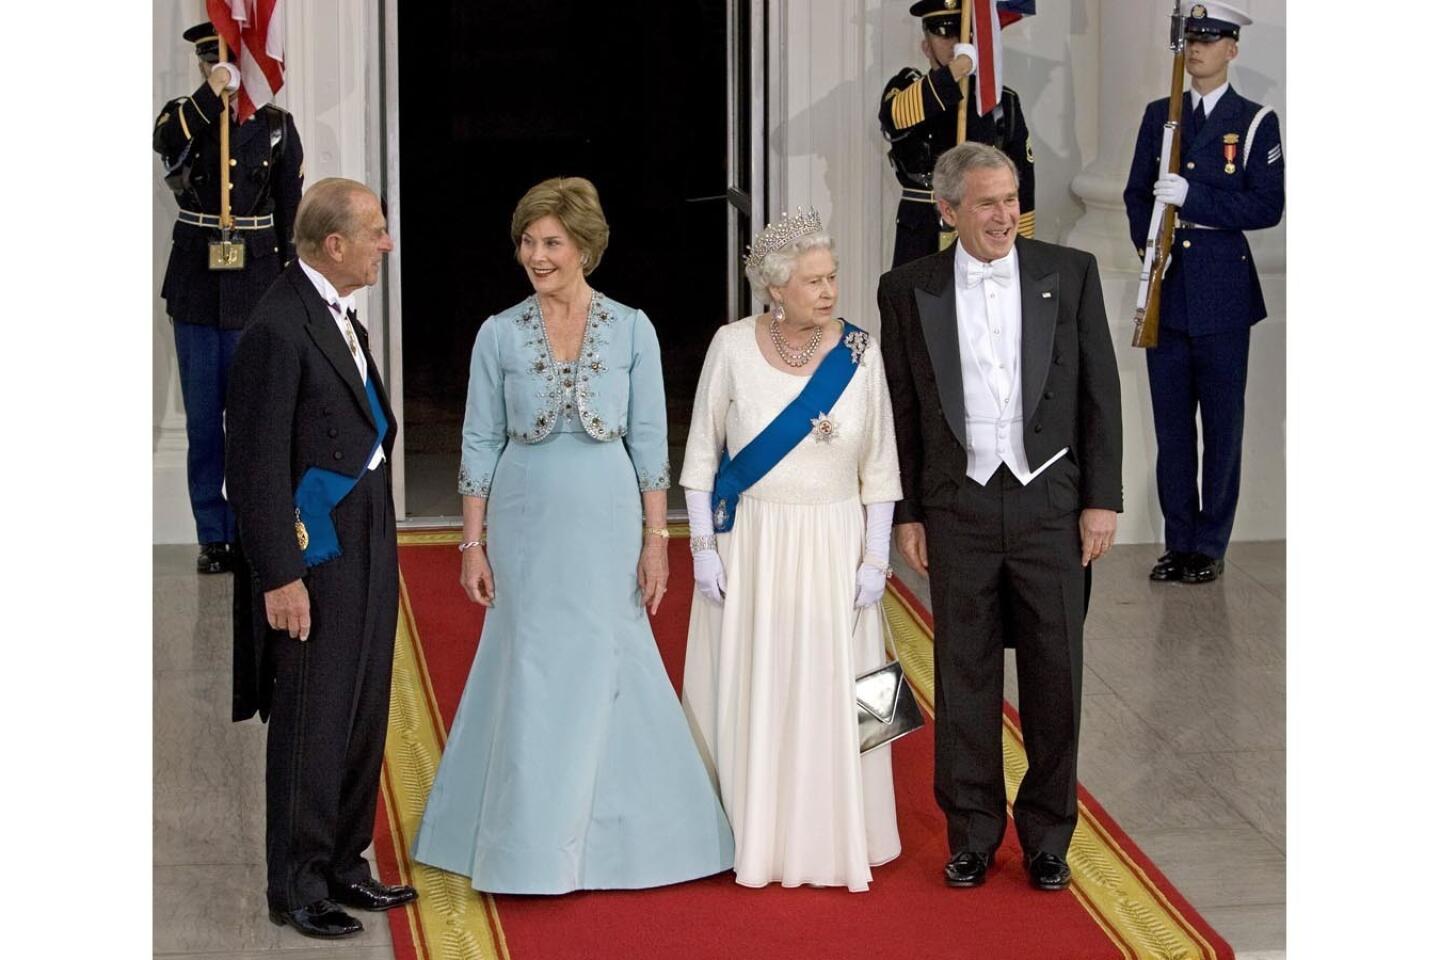 Queen Elizabeth II and Prince Philip with President George W. Bush and First Lady Laura Bush at the White House in May 2006.